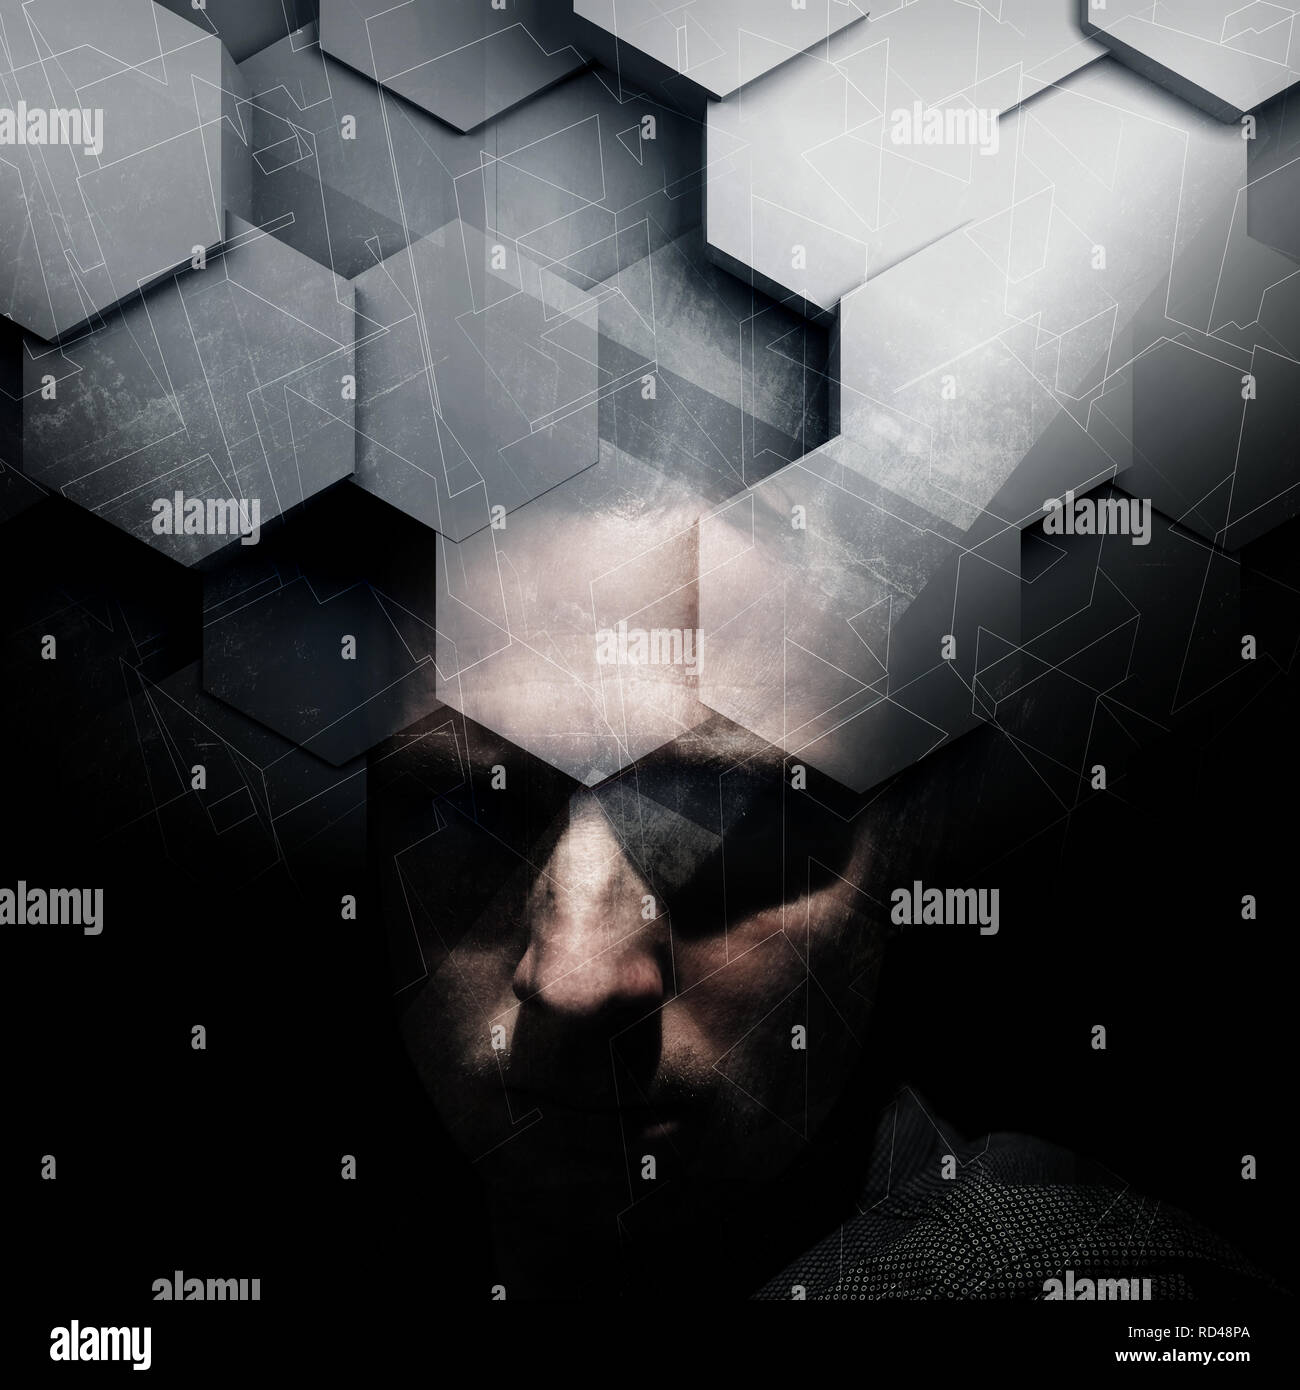 Dark portrait of young European man over black background with high-tech hexagonal pattern Stock Photo